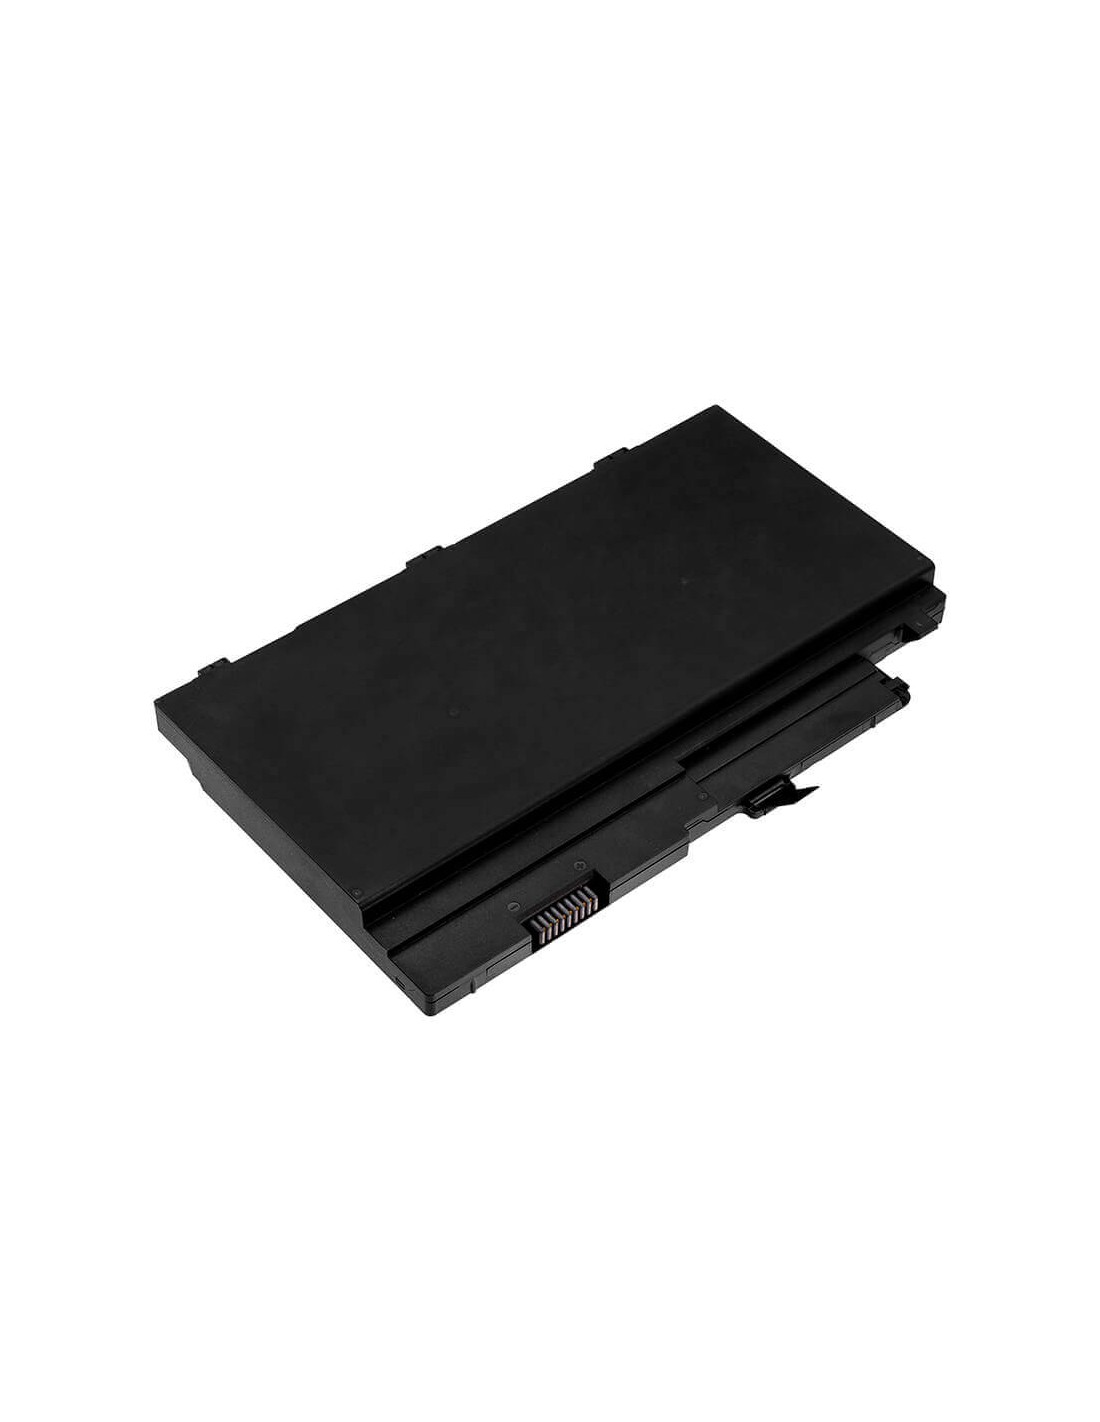 Battery for Hp, Zbook 17 G3 Mobile Workstation, Zbook 17 G4 11.4V, 8300mAh - 94.62Wh